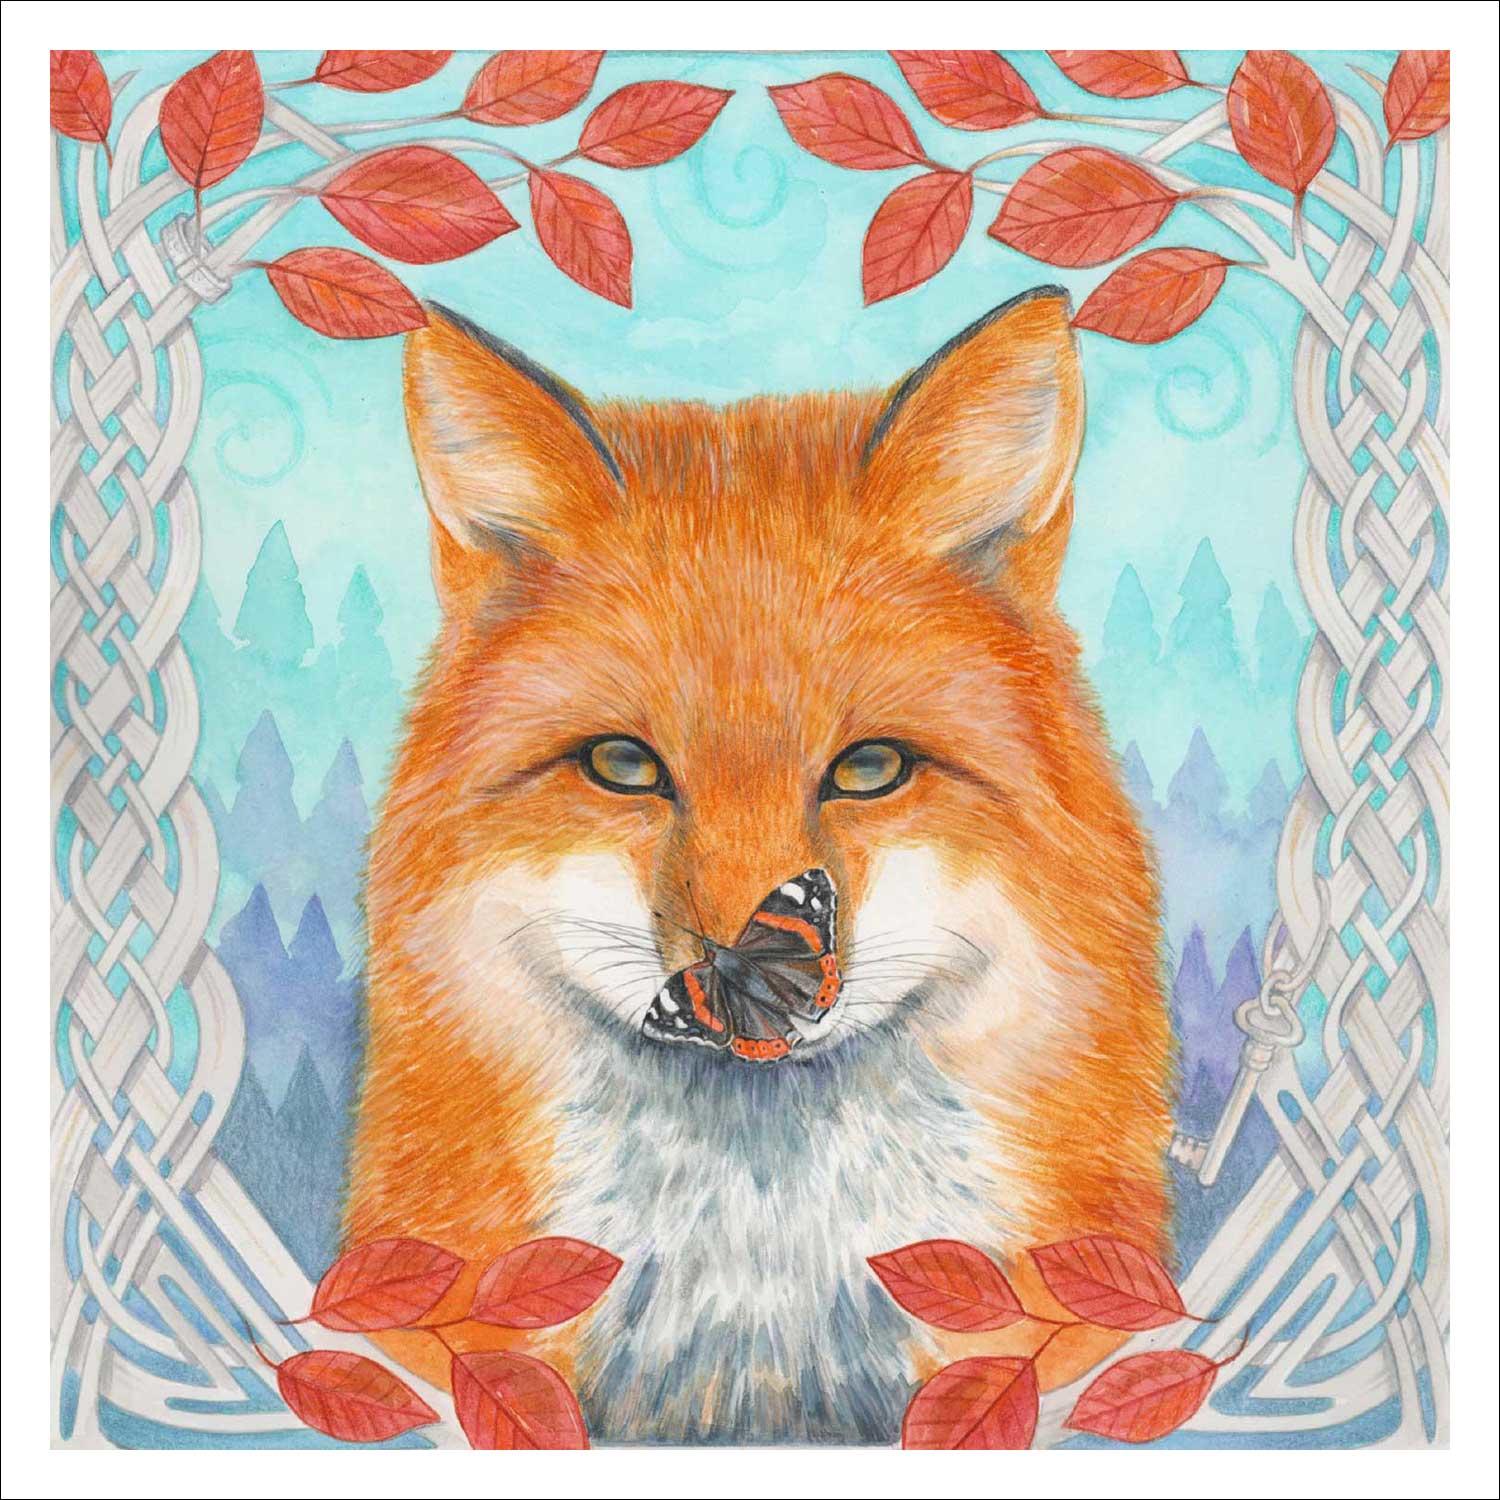 Fox Art Print from an original painting by artist Marjory Tait